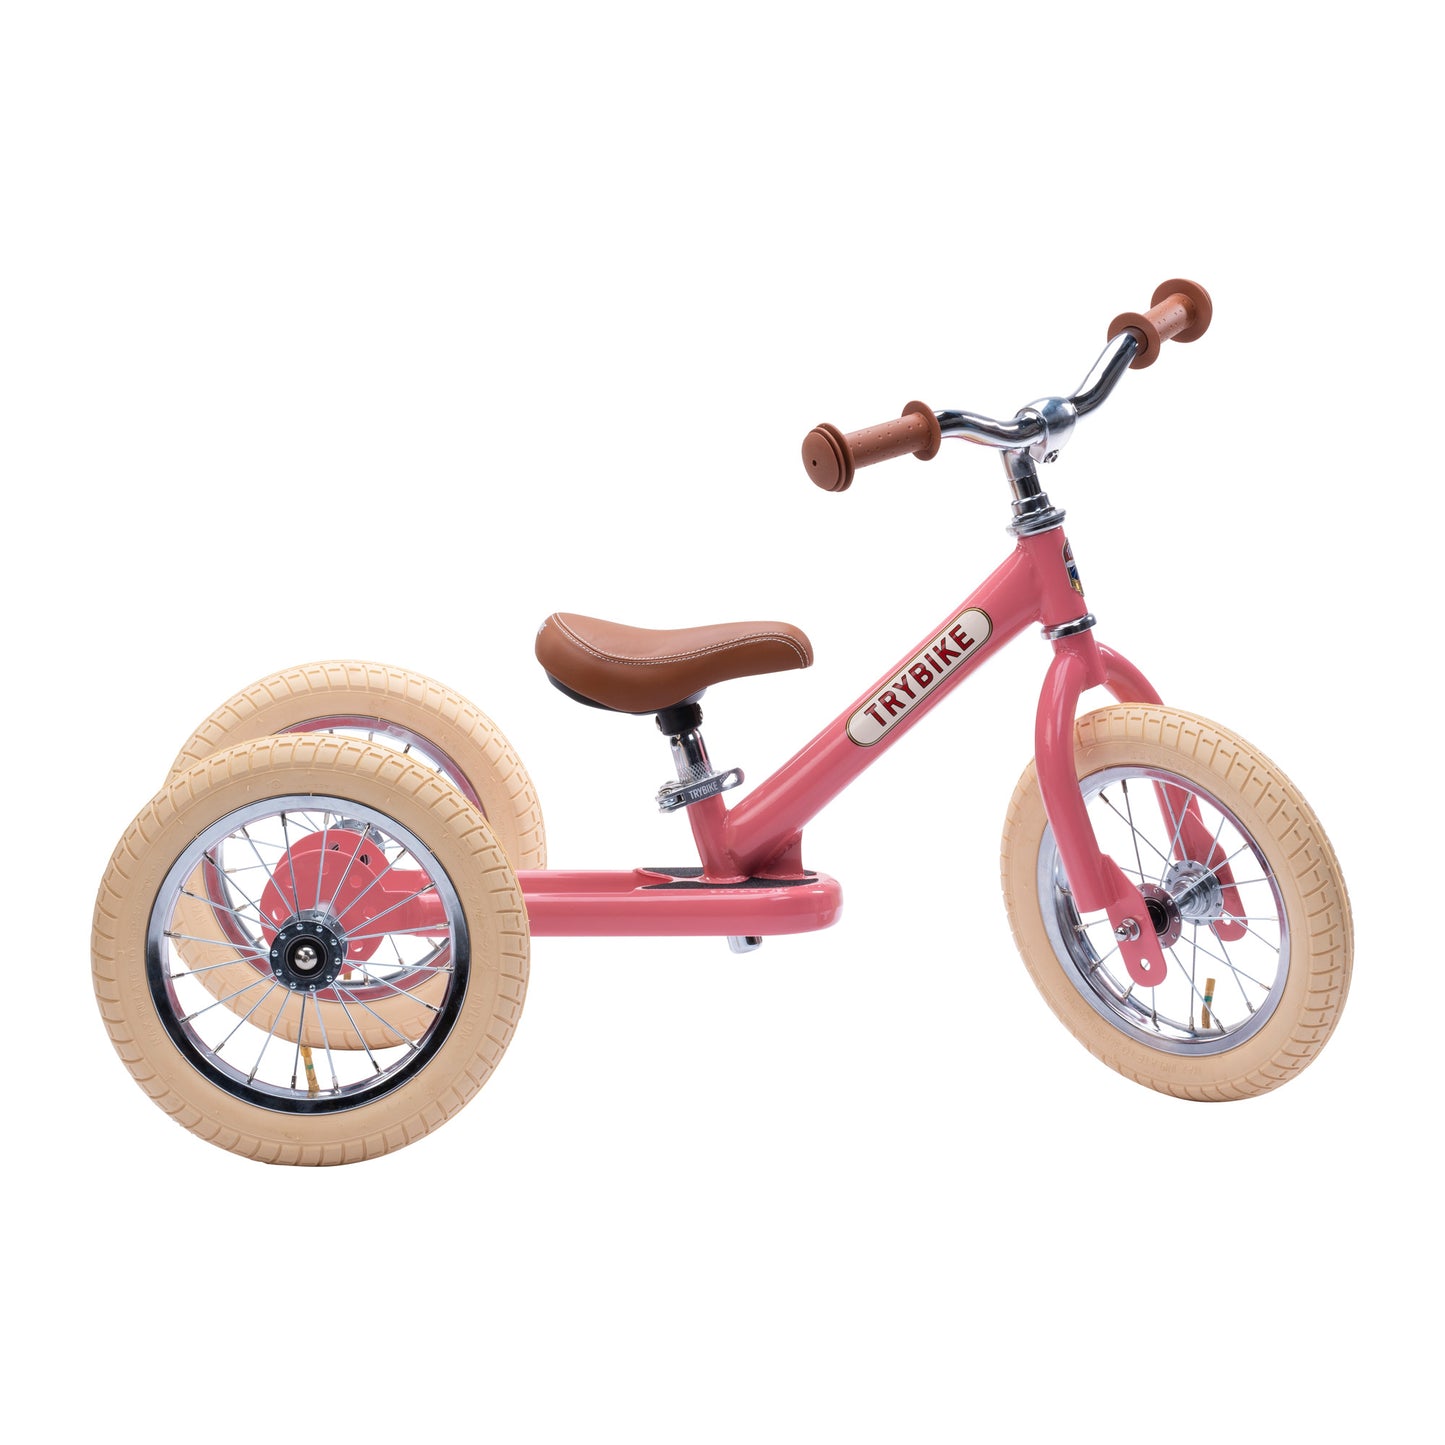 TryBike - Trike and Balance Bike *Click and Collect or In Store Purchase Only*